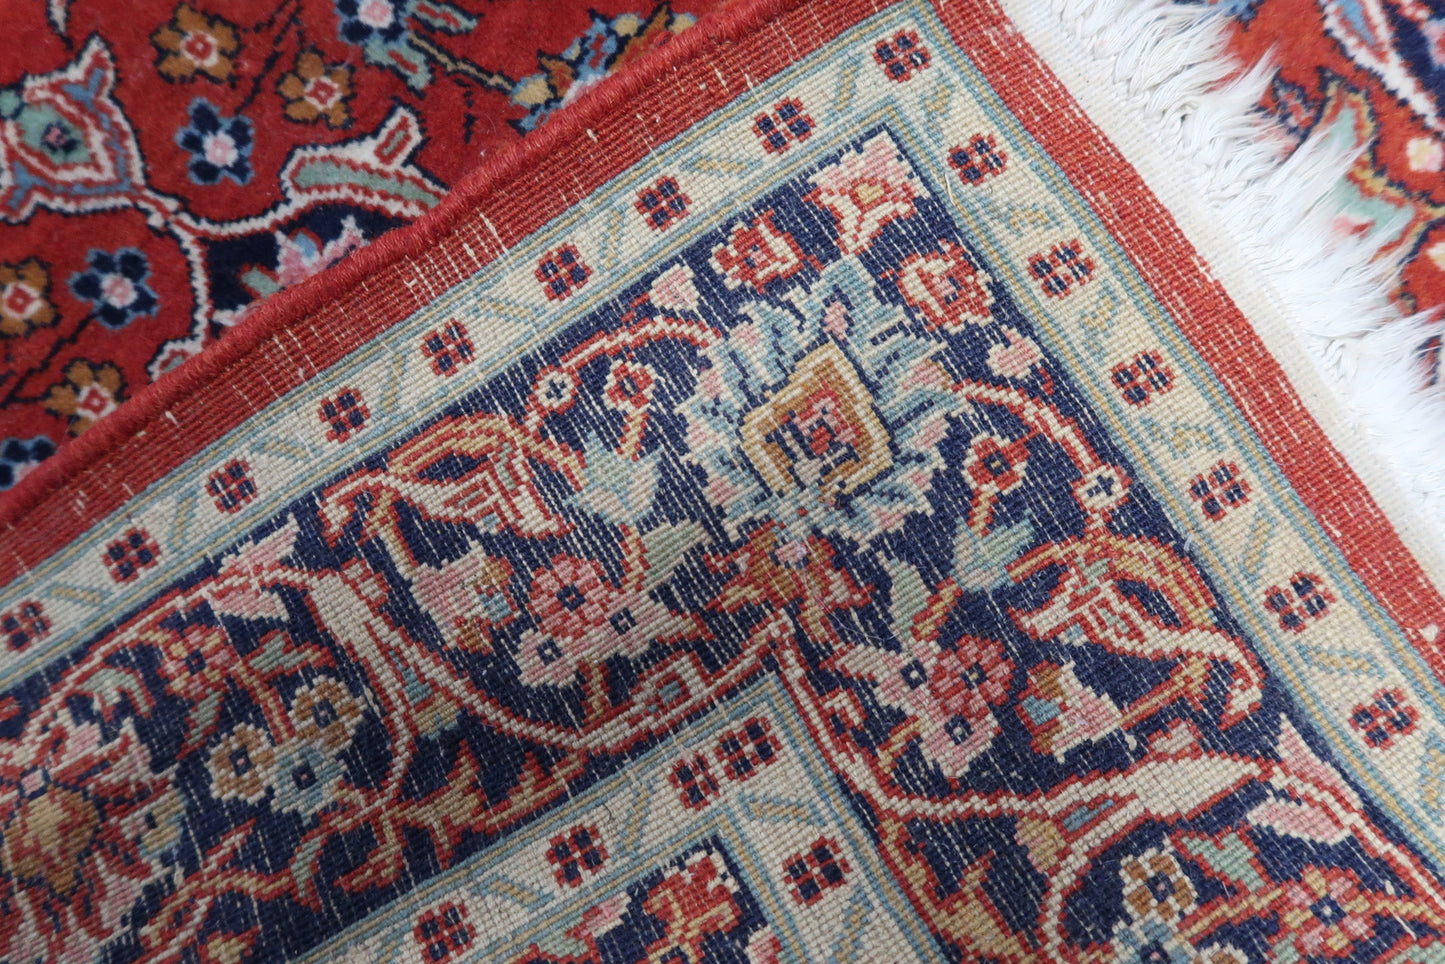  Back view of the handmade antique Persian Kashan rug showcasing its original good condition and fine craftsmanship.